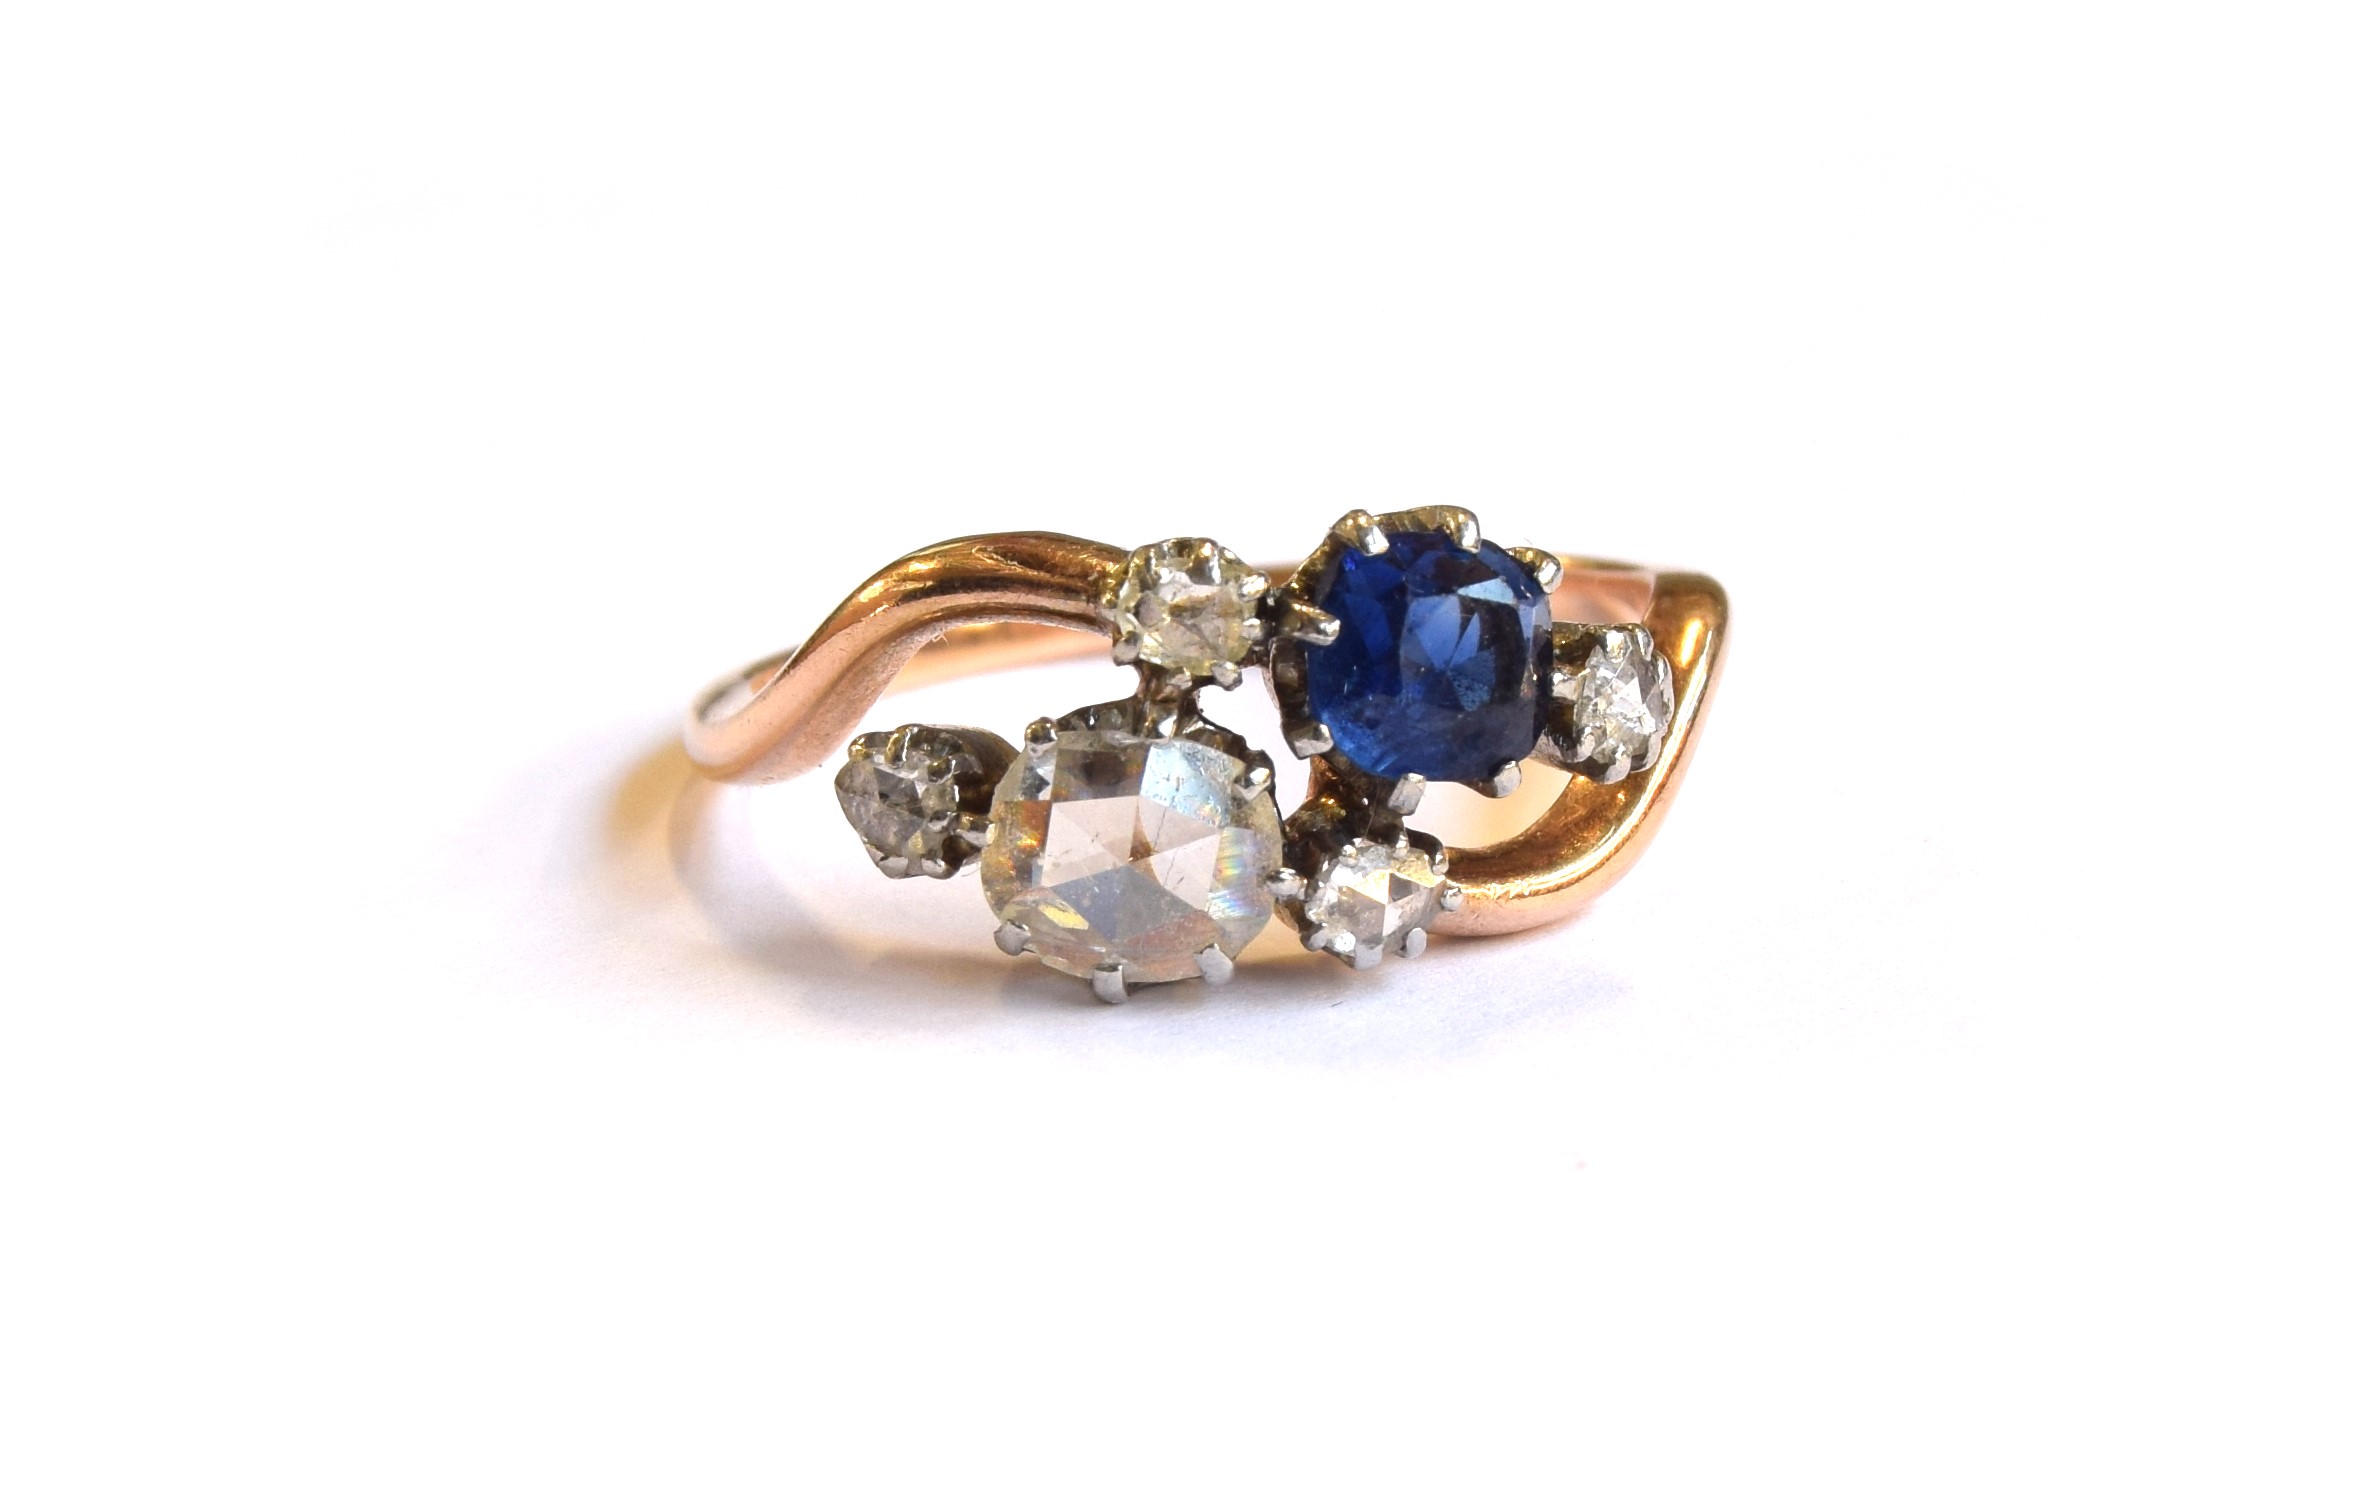 An early 20th century 18ct gold 'Toi et Moi' diamond and sapphire crossover ring, the large rose cut